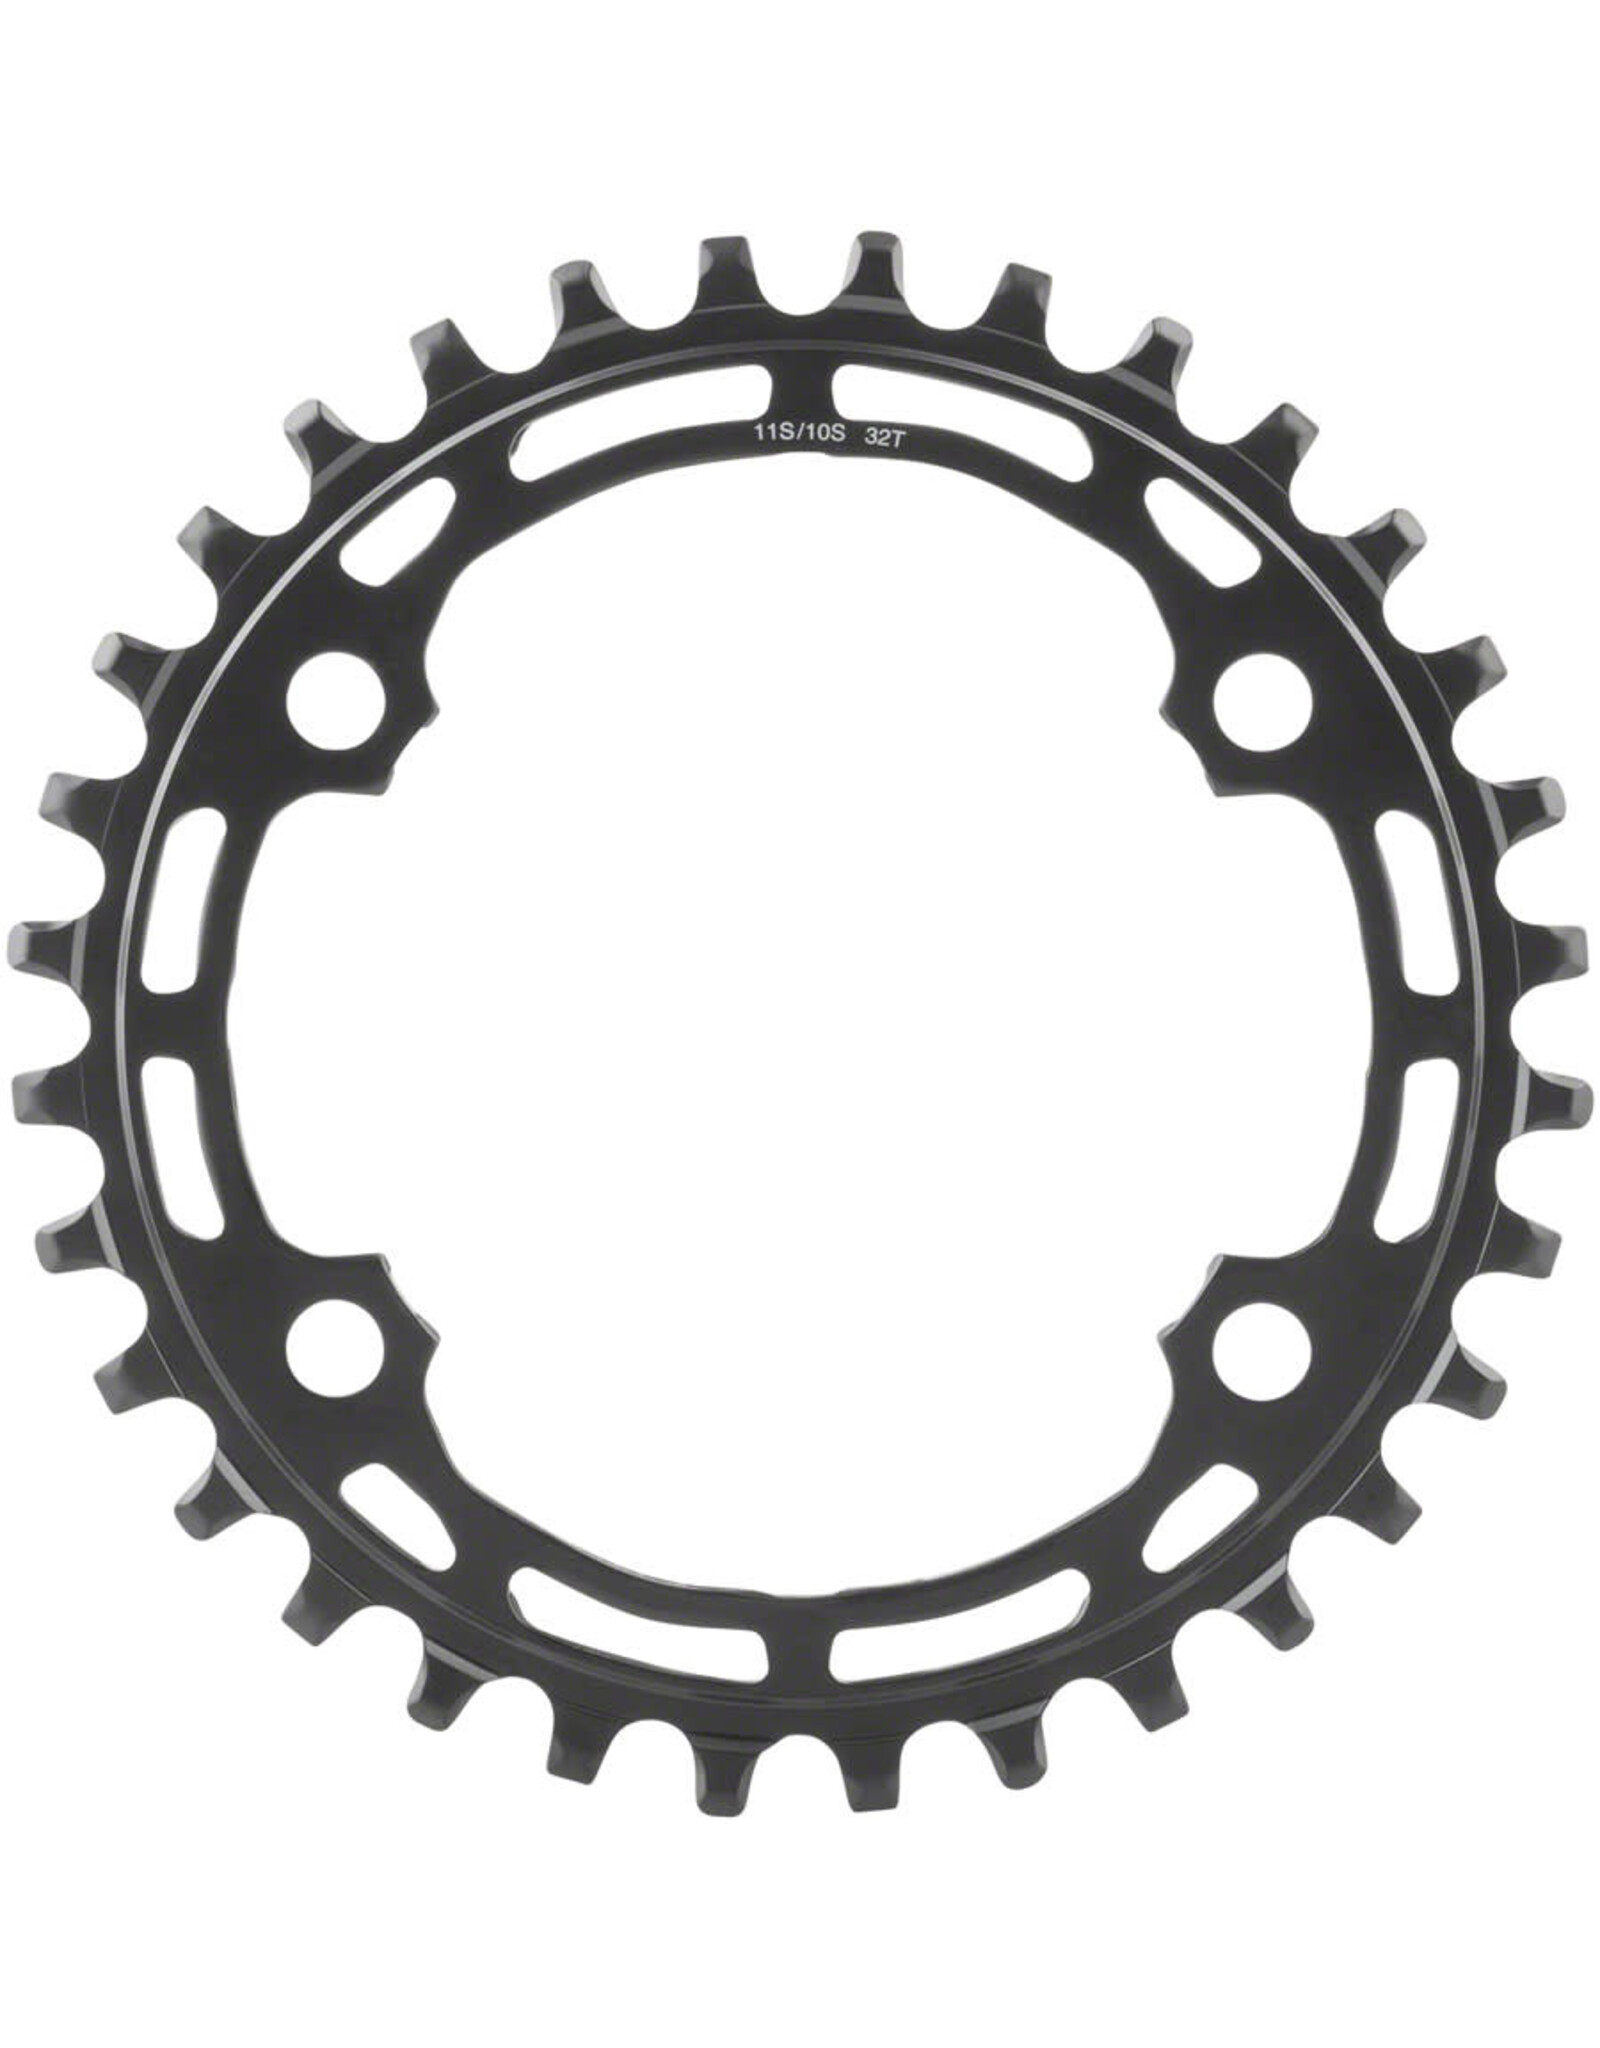 Shimano Shimano Deore M5100-1 Chainring - 30t, 10/11-Speed, Asymmetric 96 BCD, Black